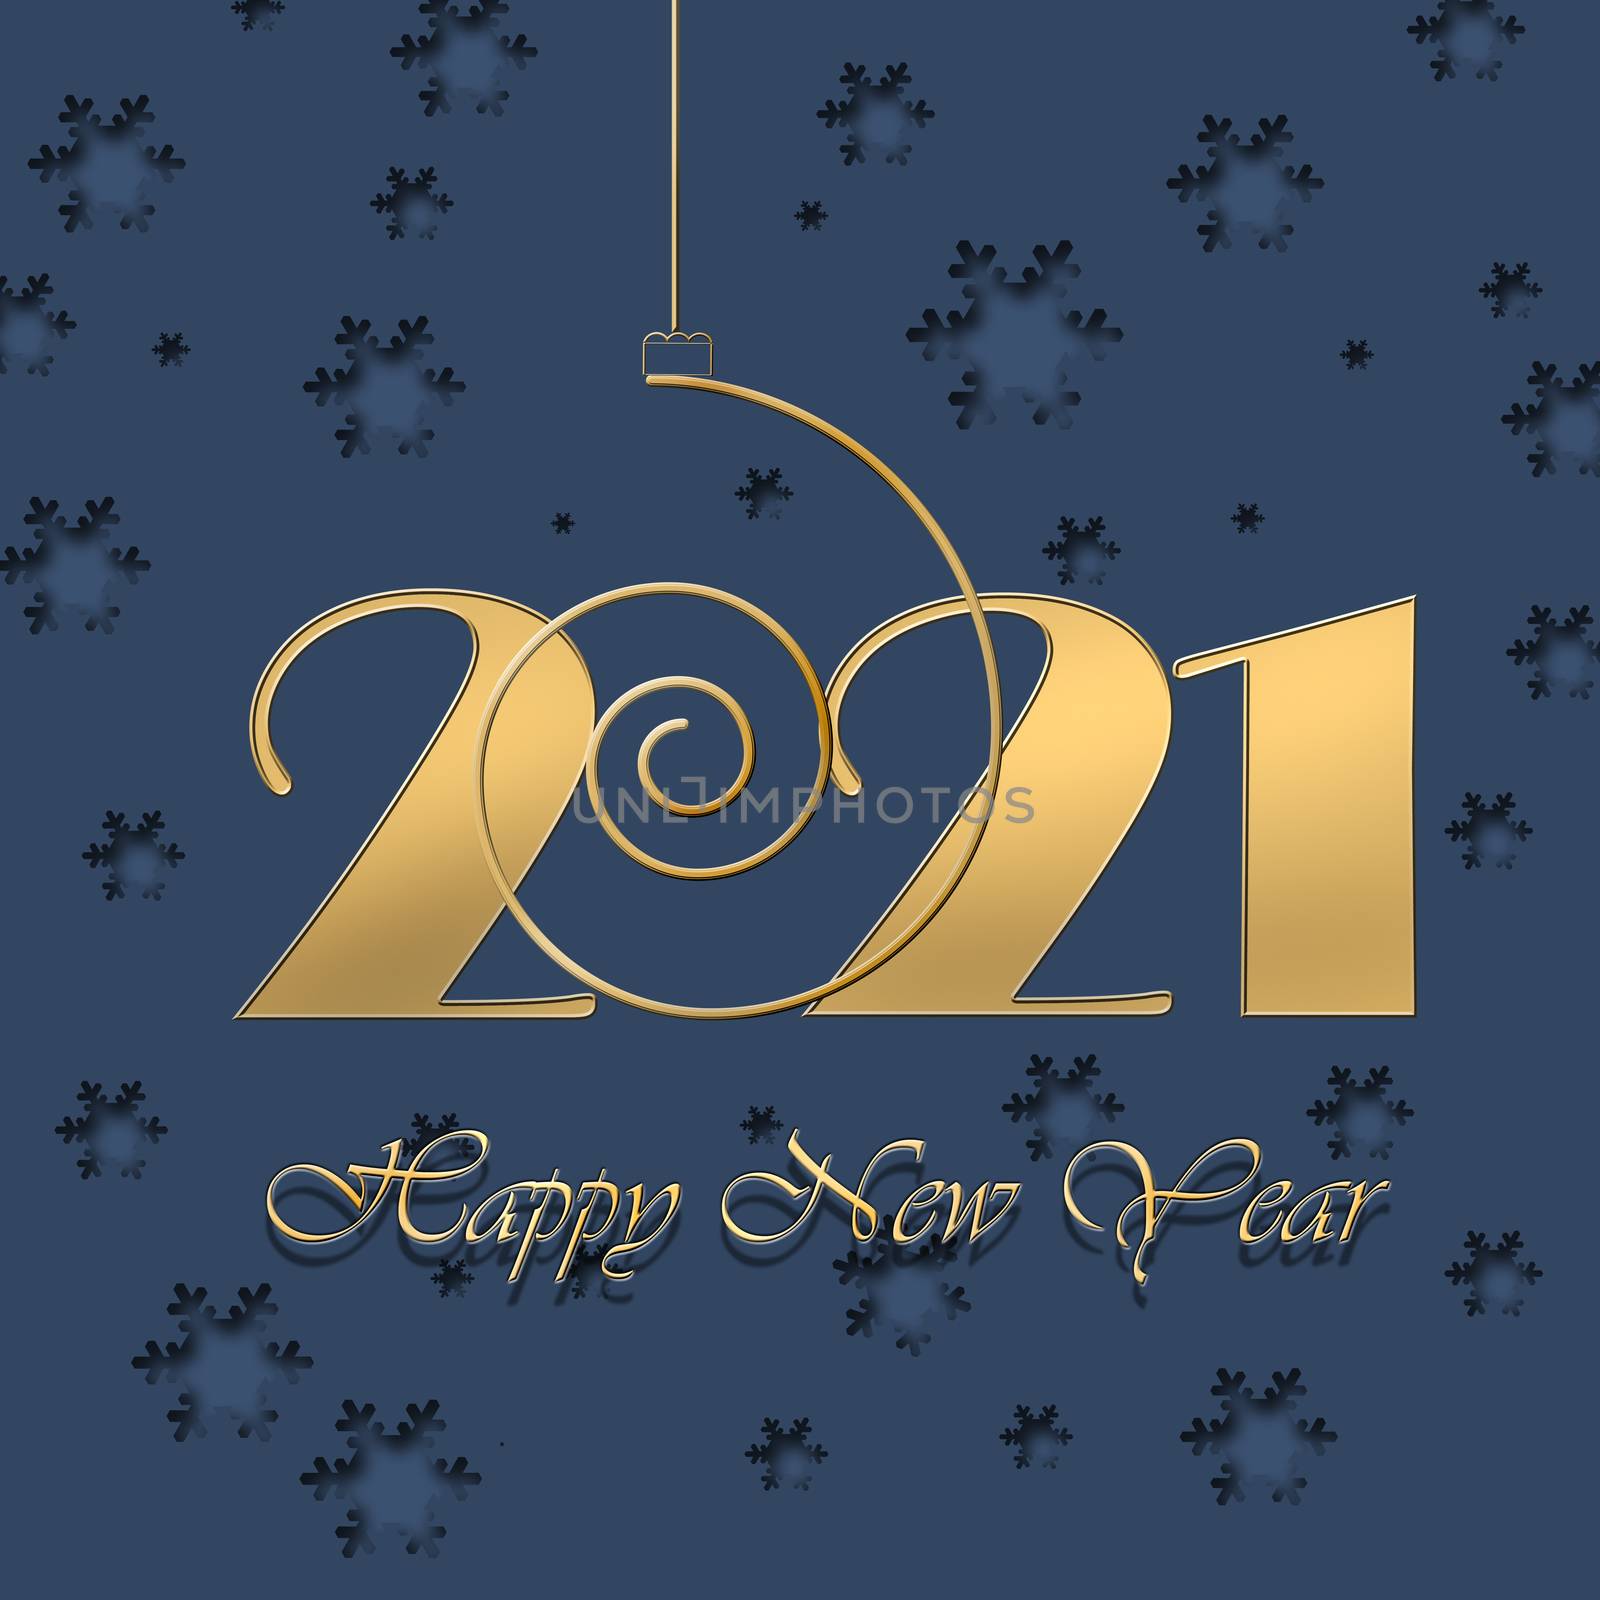 Luxury 2021 Happy New Year elegant design 3D illustration of golden 2021 logo numbers with snowflakes on blue background. Greeting card, banner